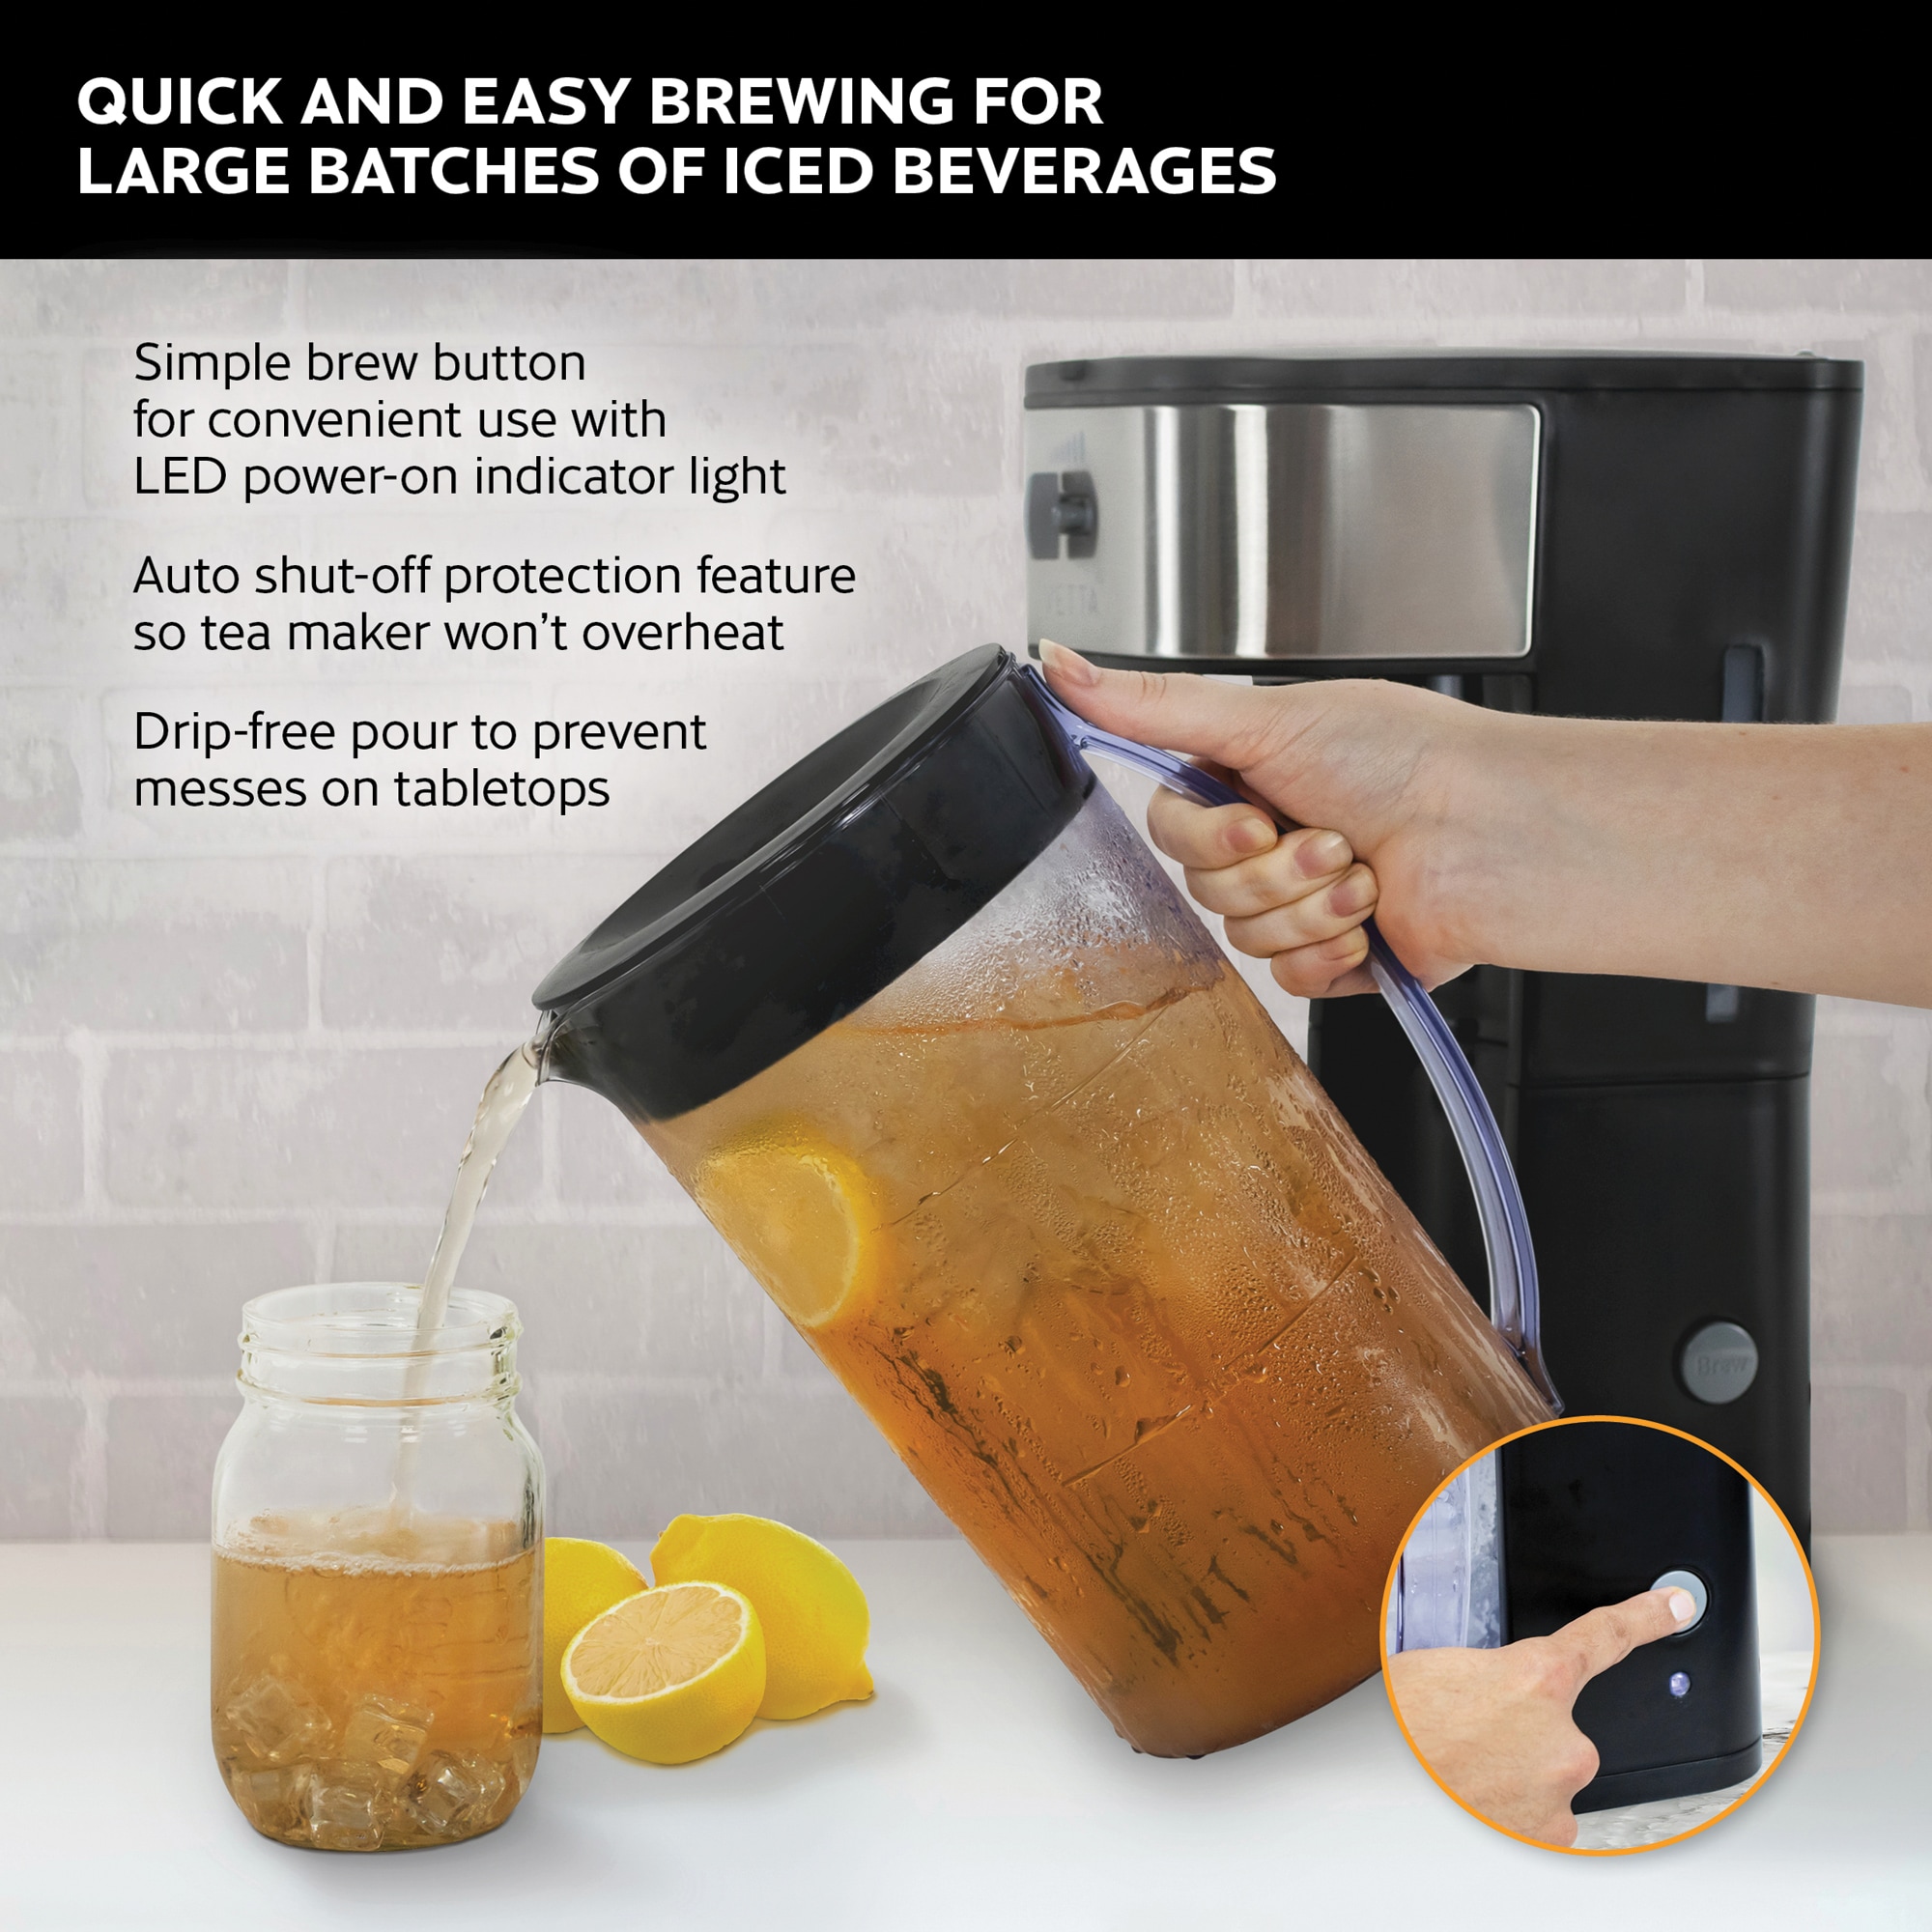 10 Best Iced Tea Makers for Home 